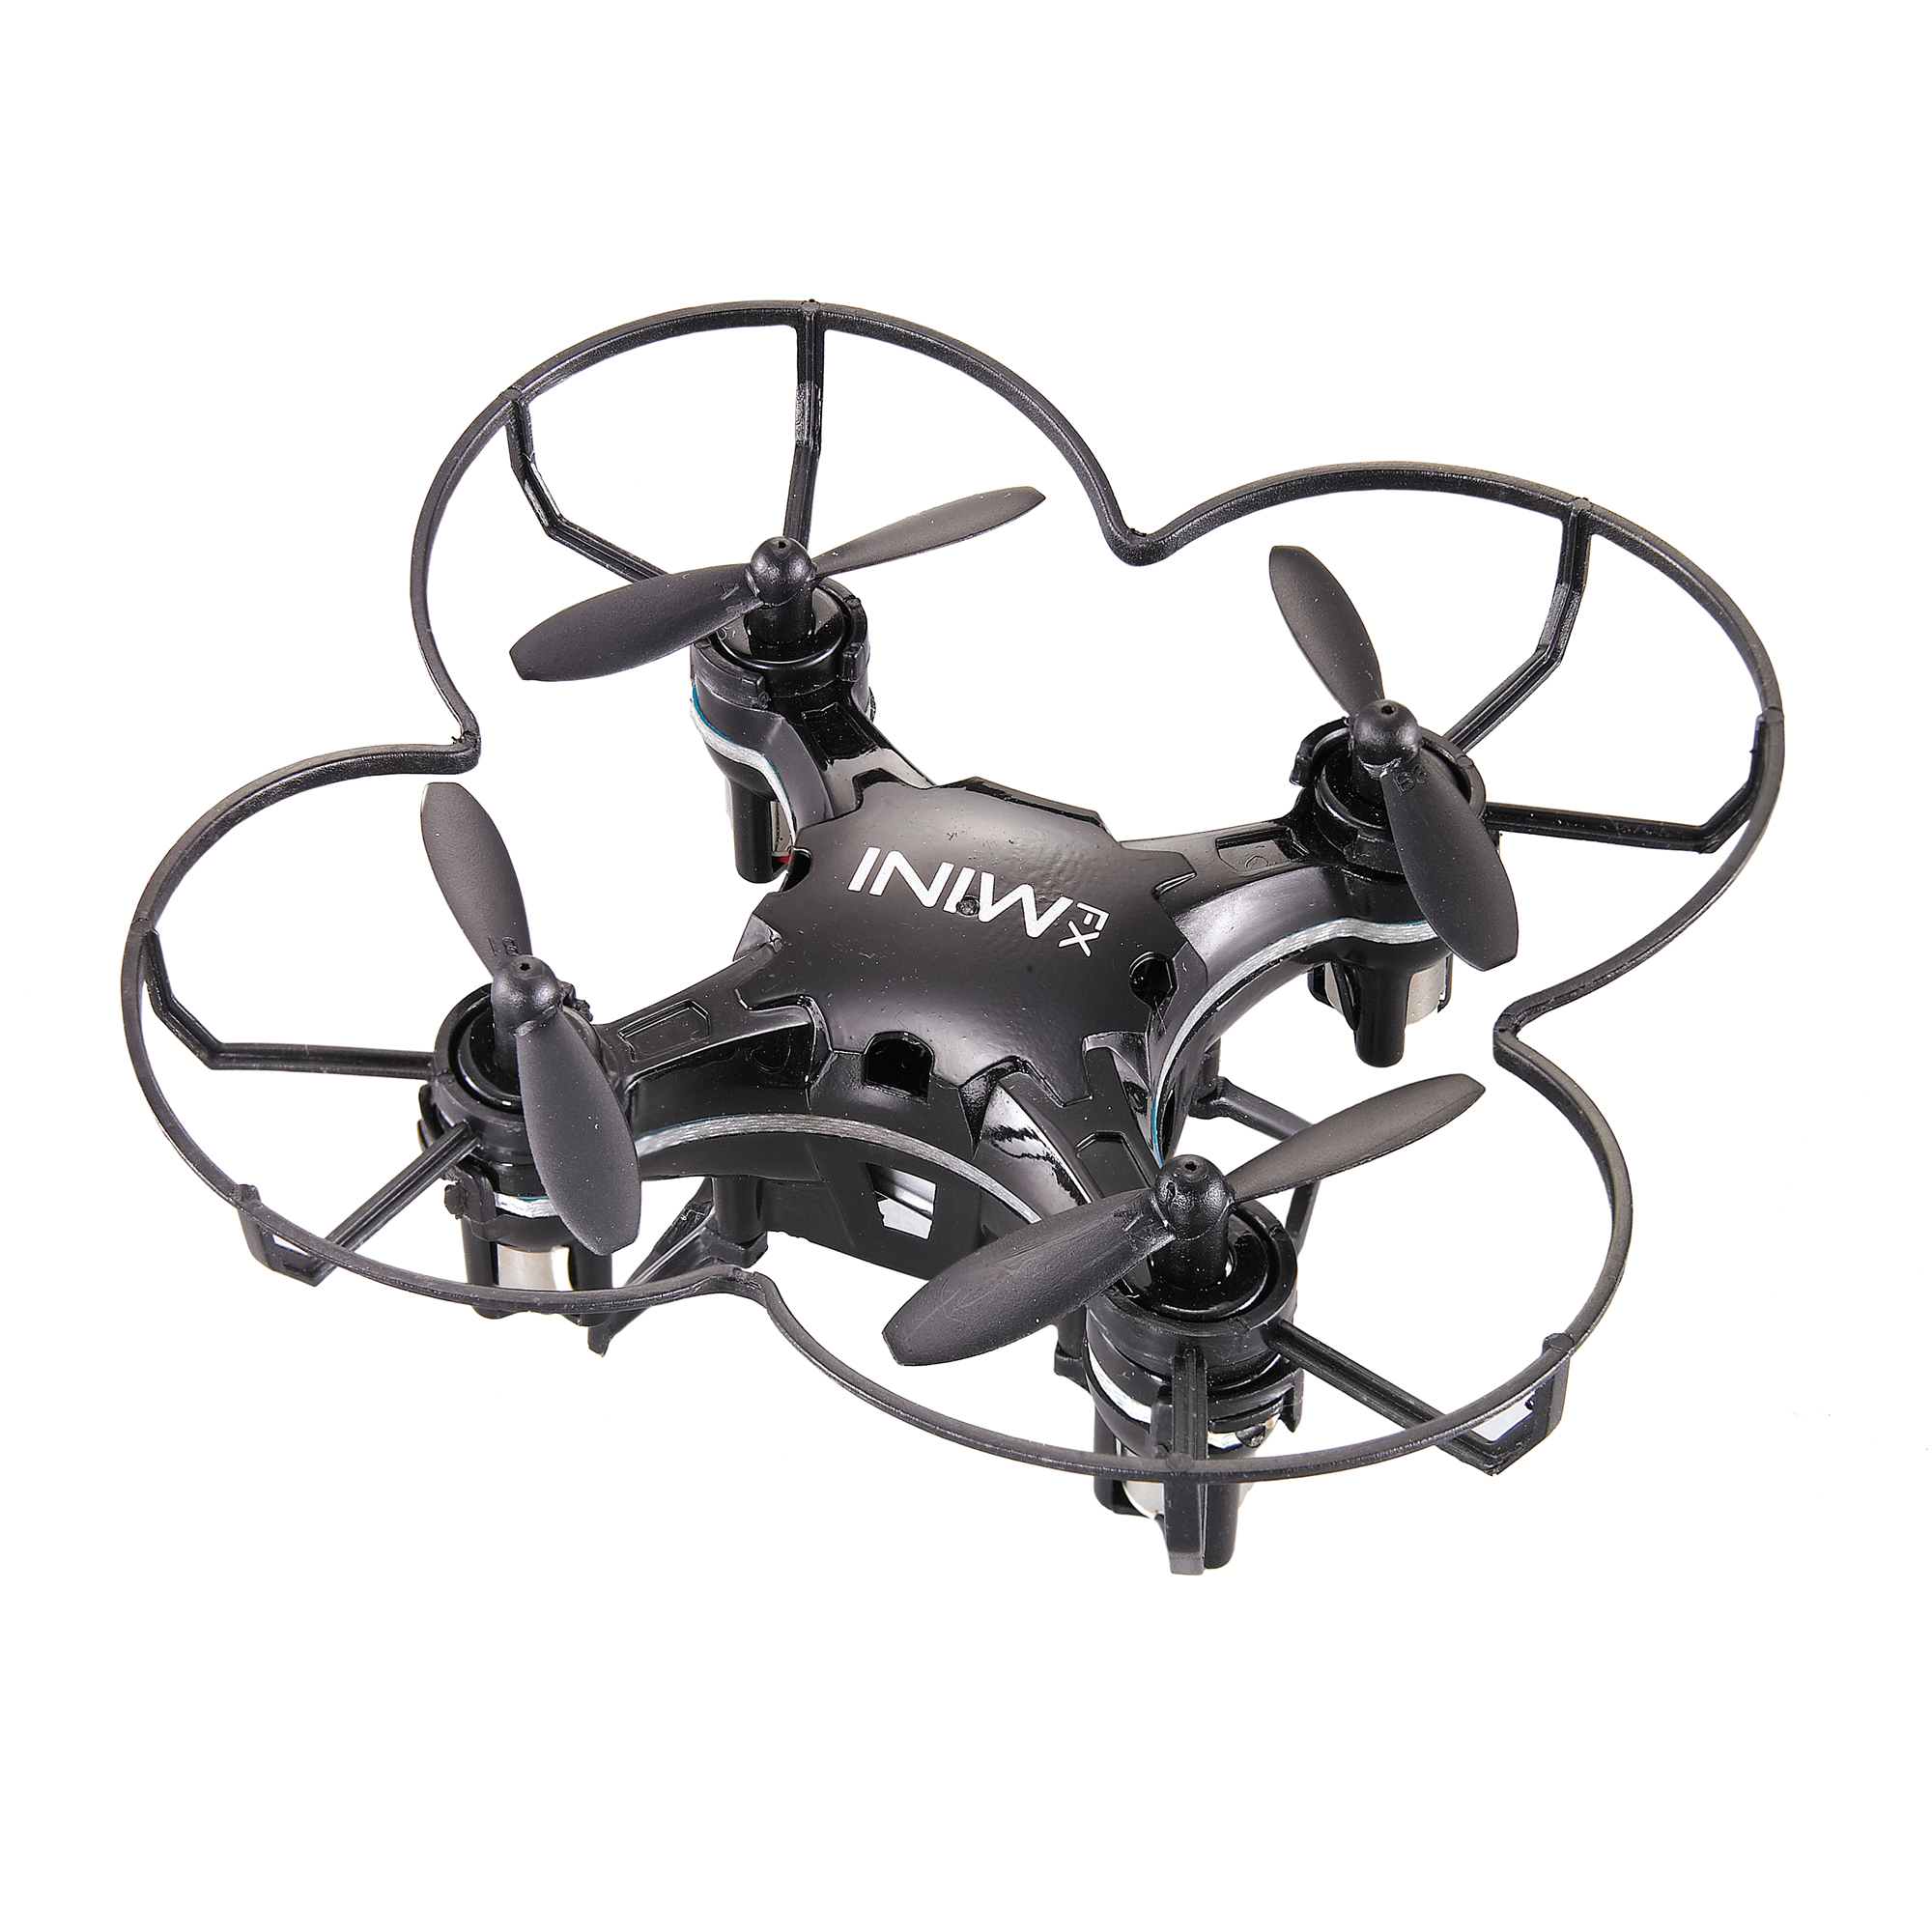 SkyDrones- FX Mini Pocket Drone (Color may vary) - image 4 of 6